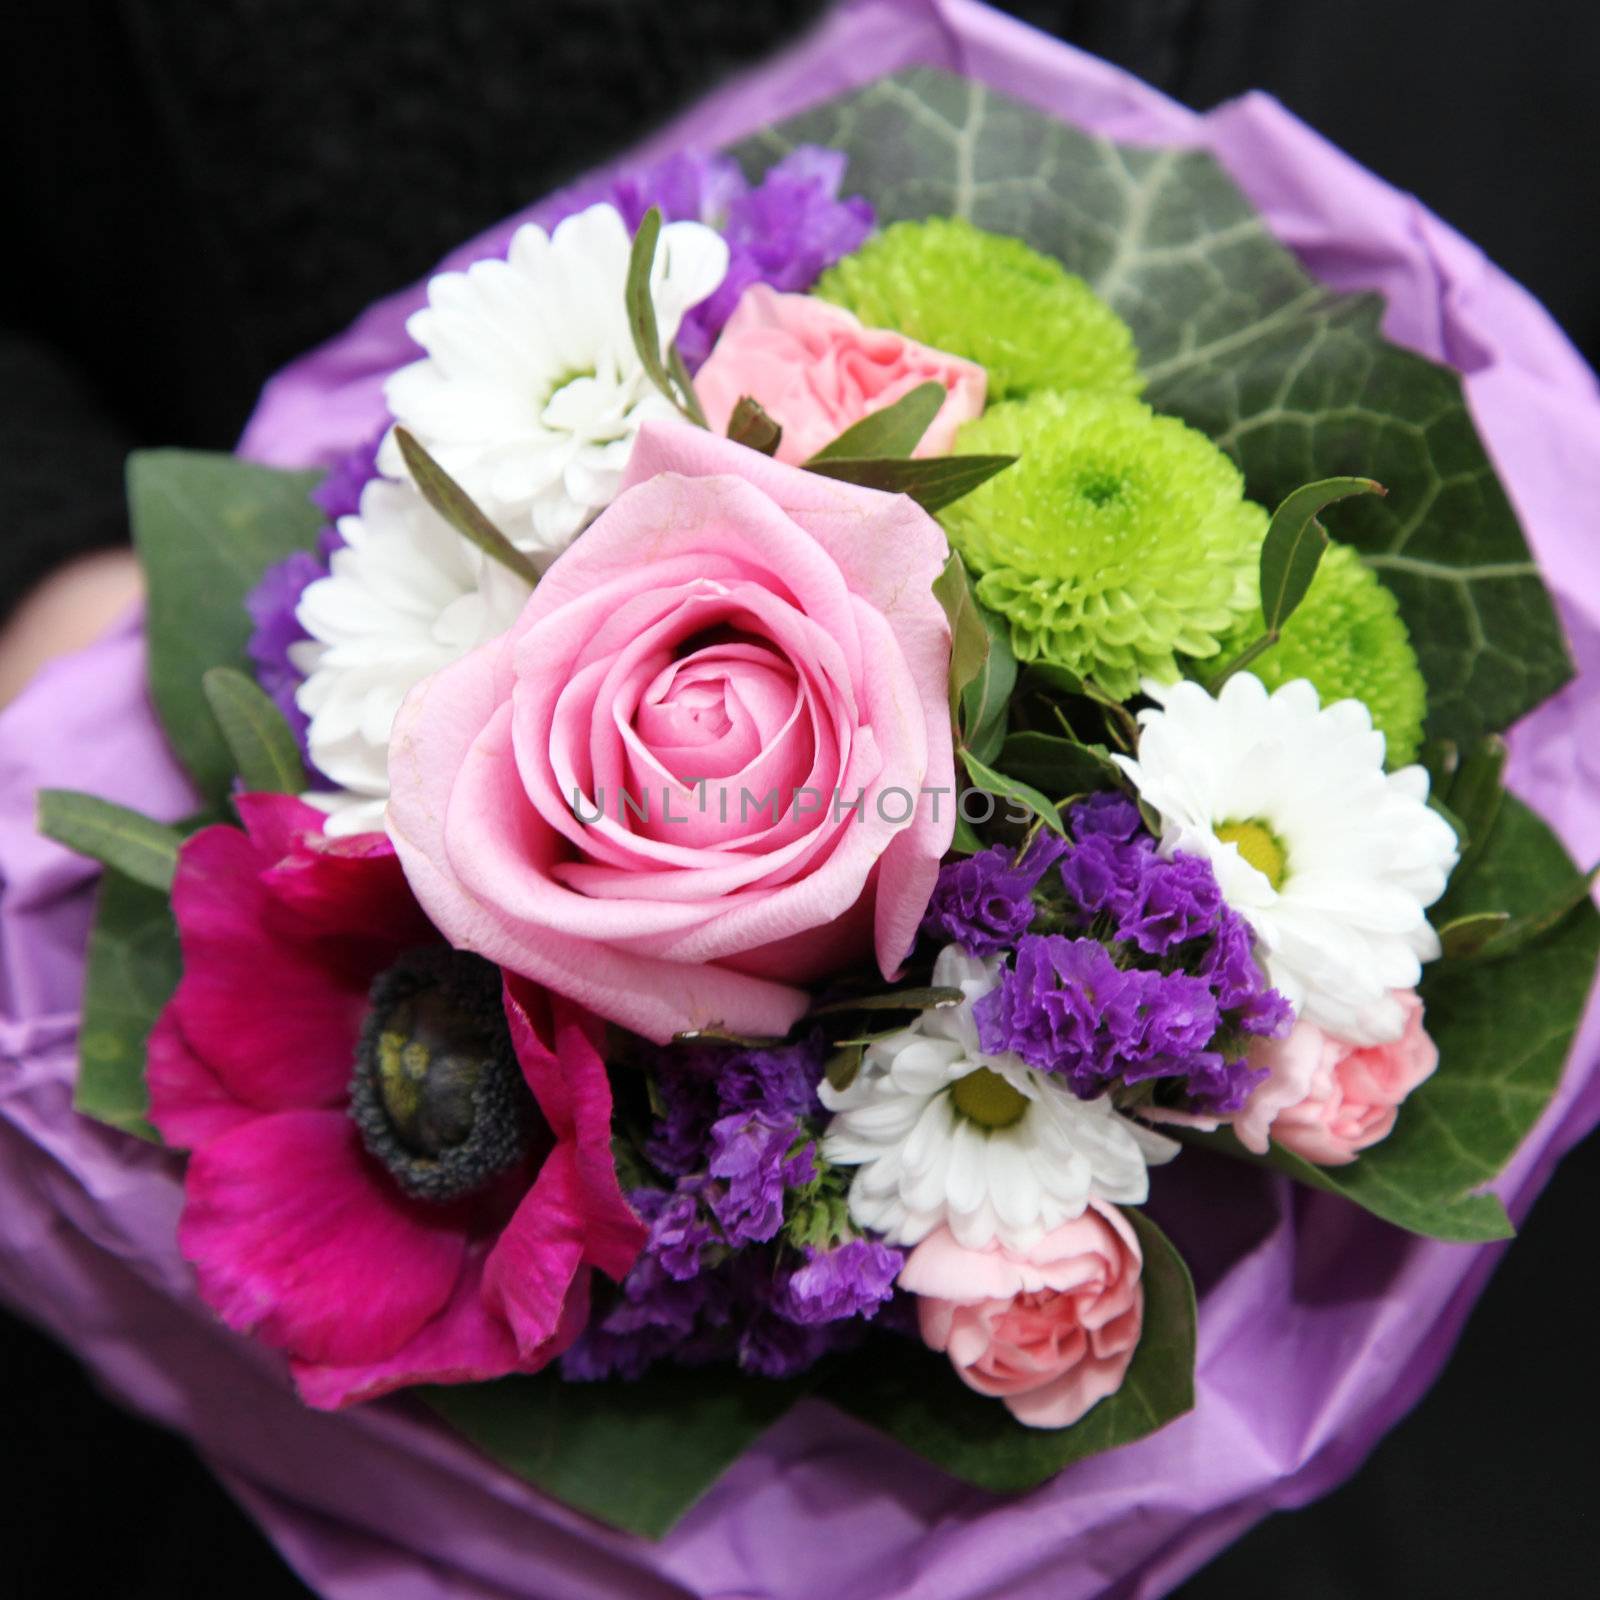 Overhead view of a colourful bouquet of mixed flowers arranged in purple tissue paper to be carried as an accessory at a wedding or celebration